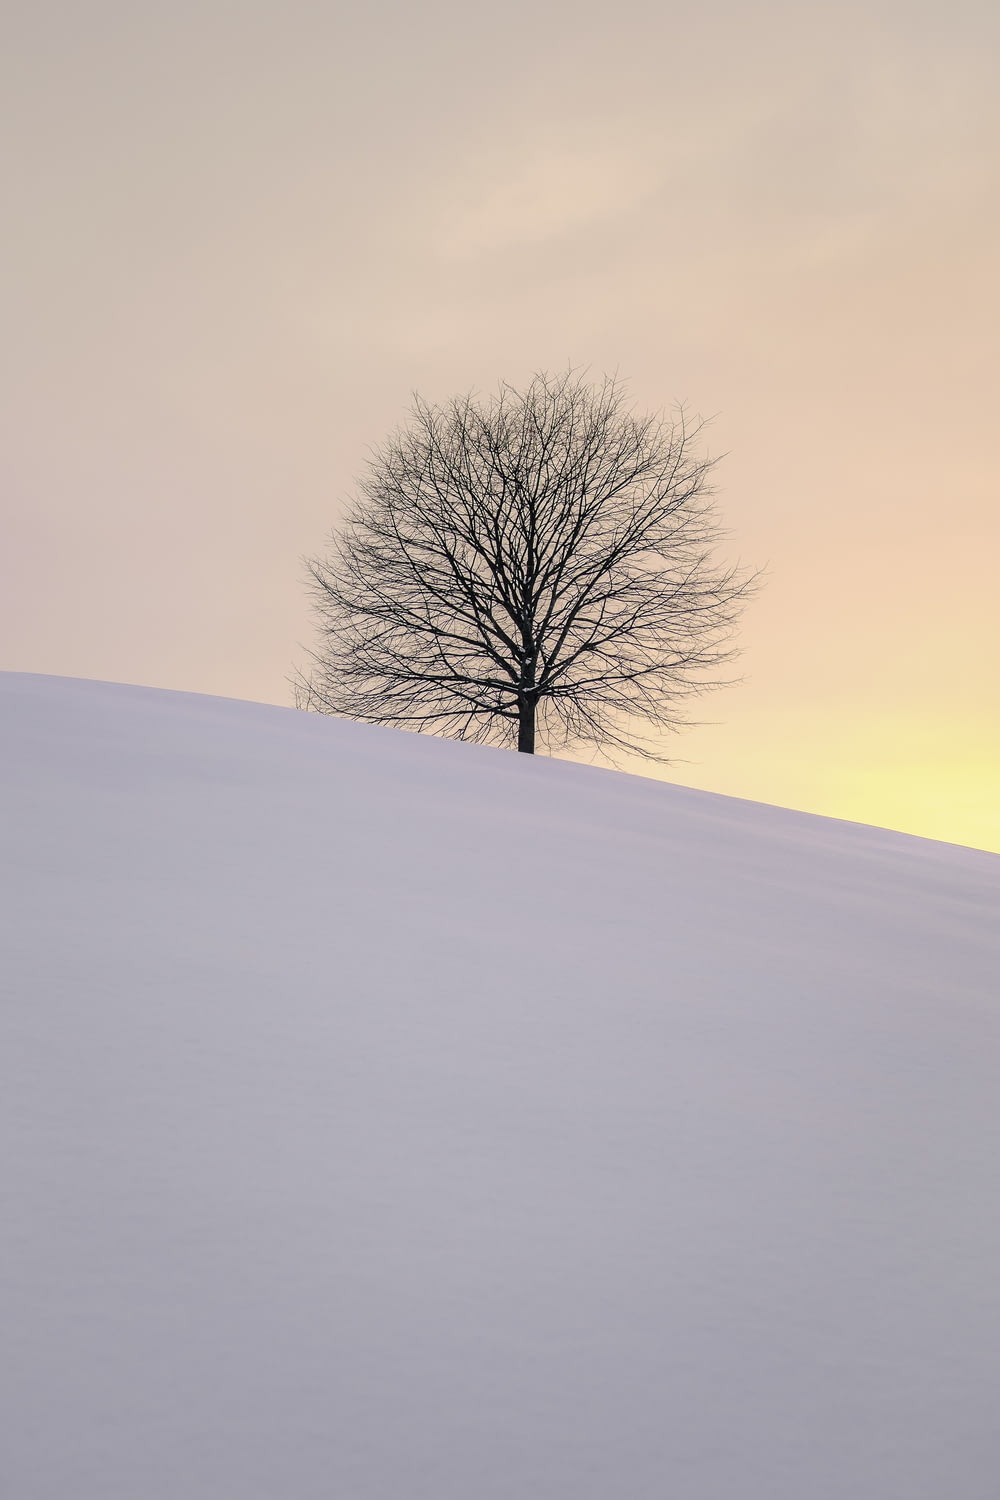 leafless tree on the hill